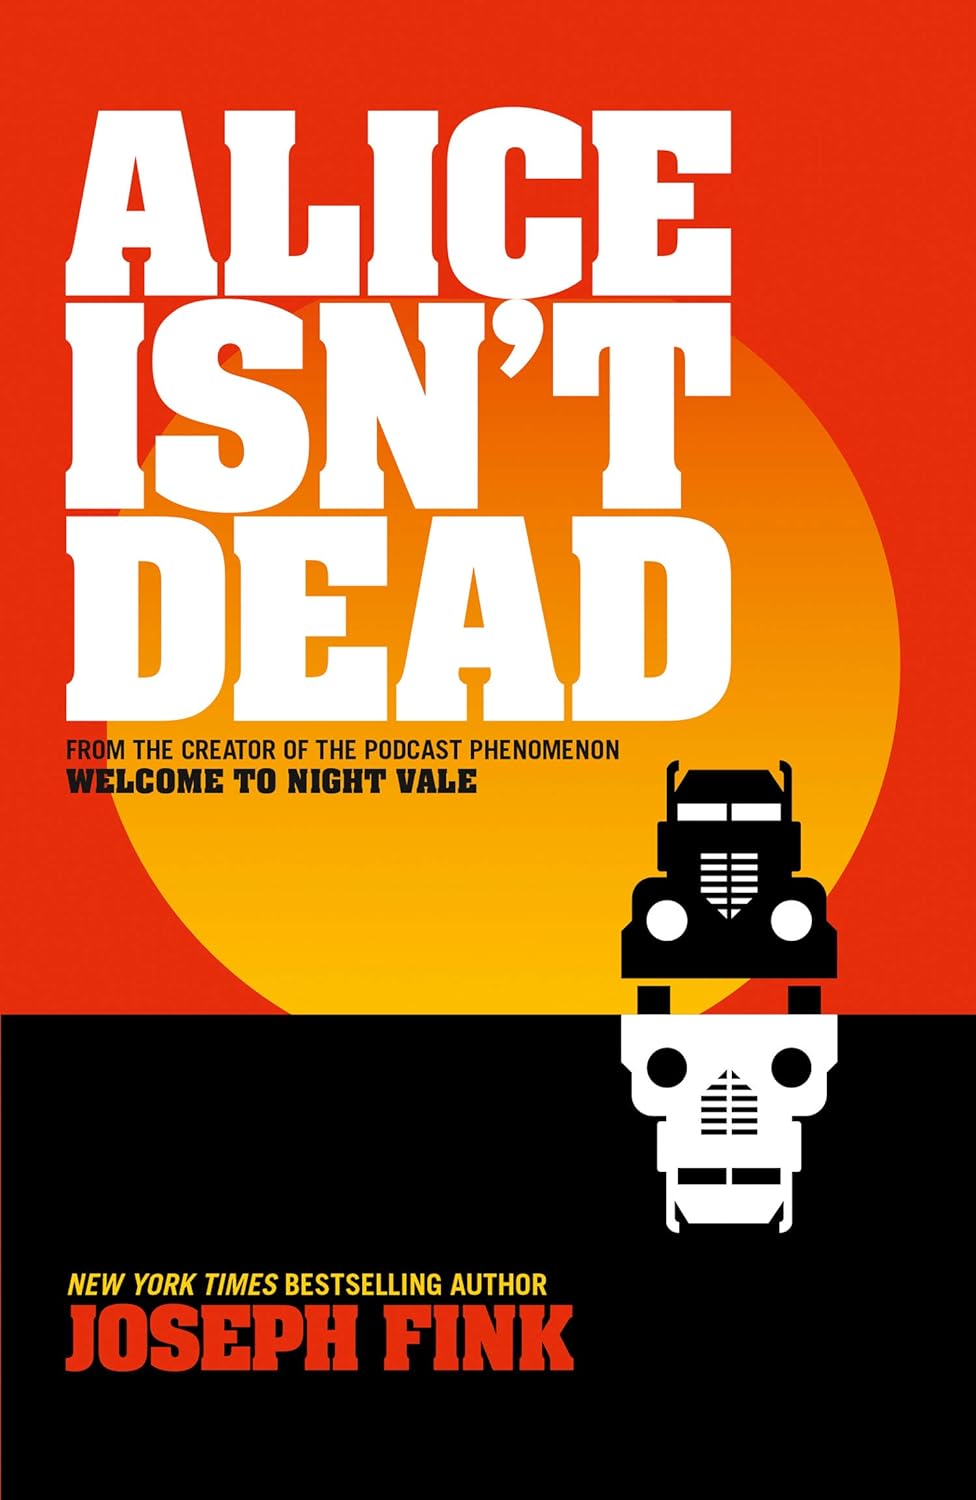 The book cover for Alice Isn't Dead shows a black truck in front of a rising sun. The truck is stood on a black road, and the truck is reflected in the black road. In the white reflection, the truck looks like a skull.